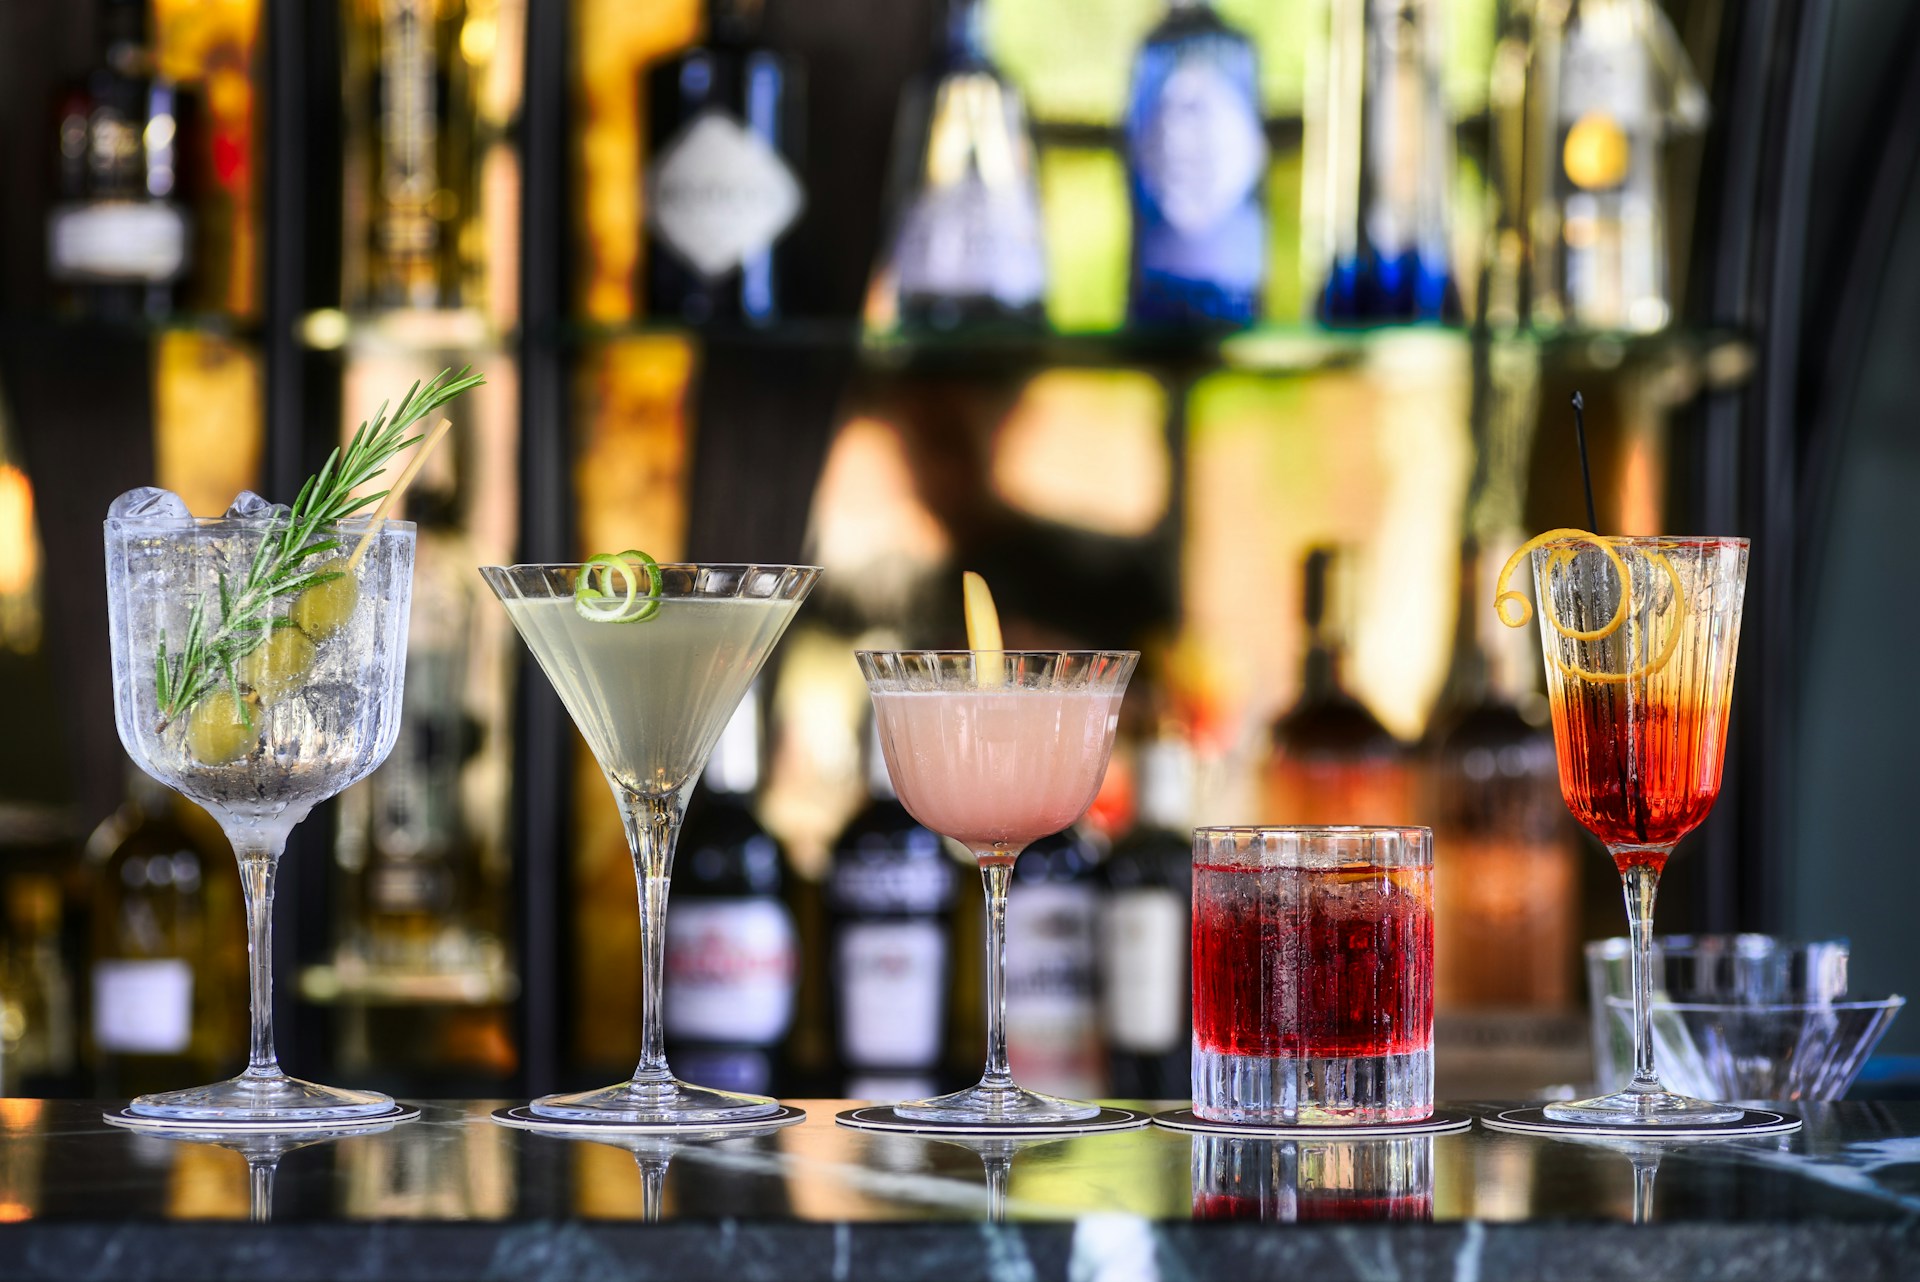 24 Drinks to Order at a Bar: Cocktails and Shots - Revivalist